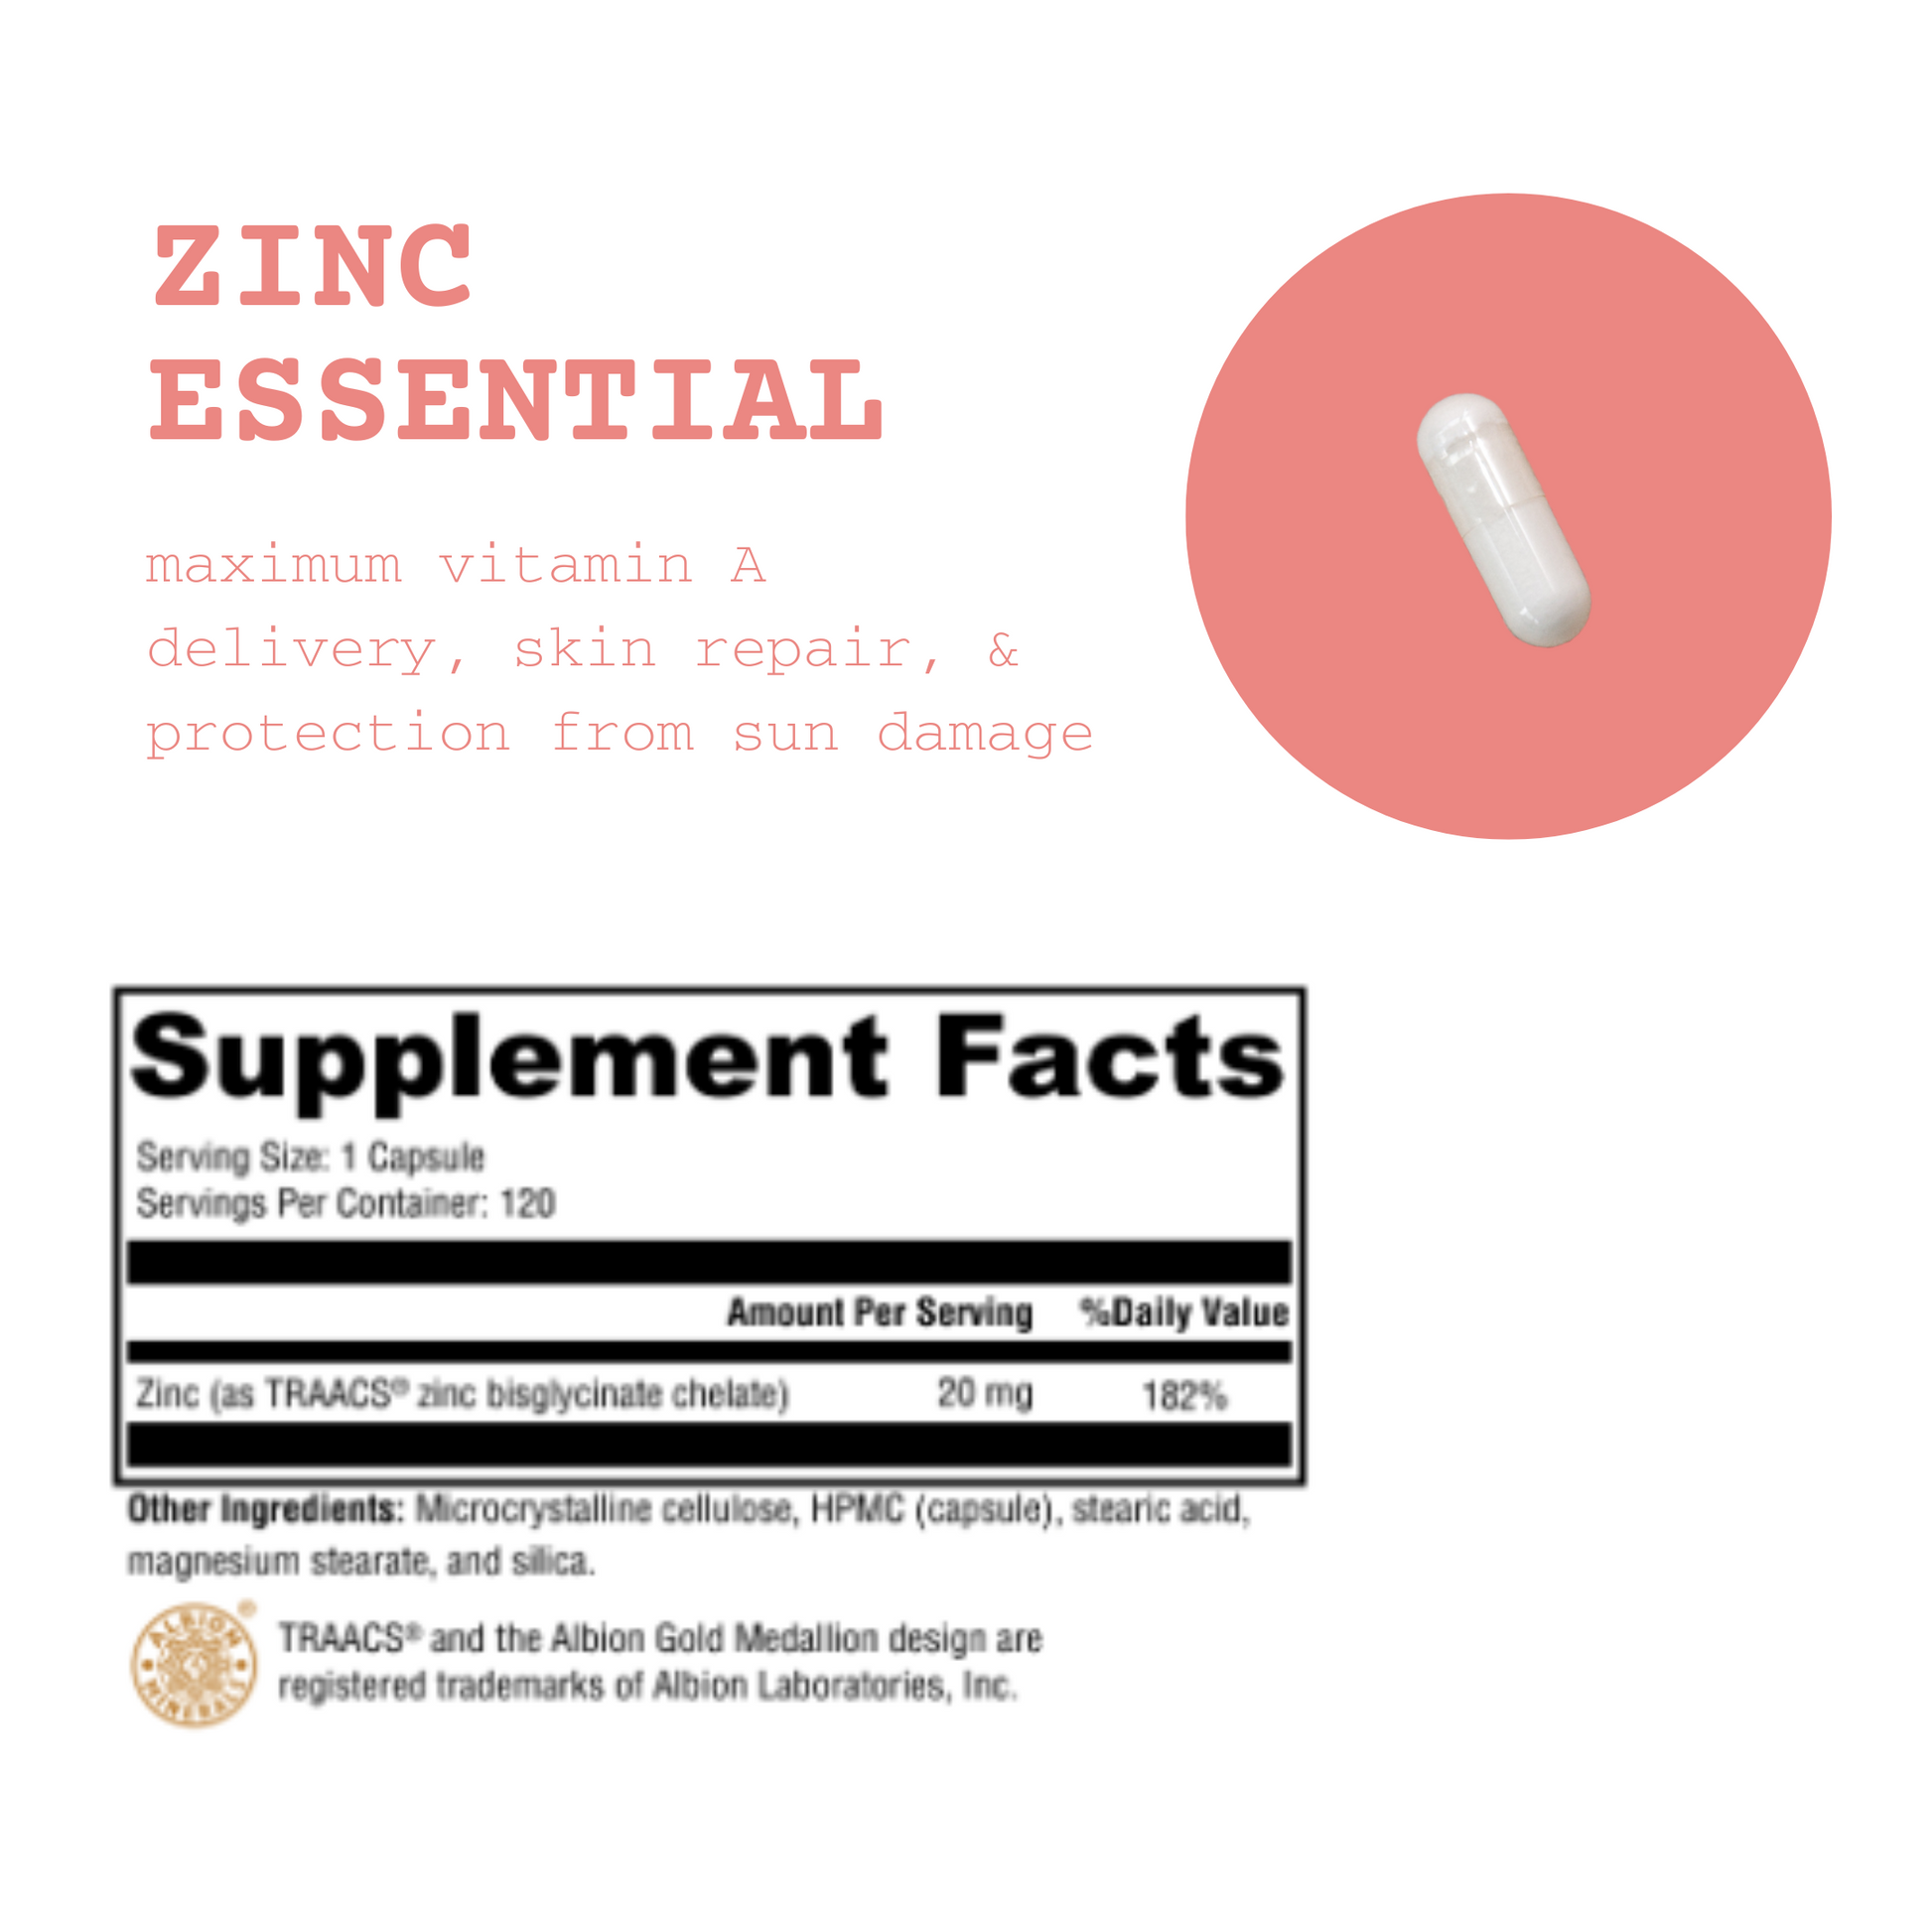 Copy of Skin Pack - Empirica Supplements